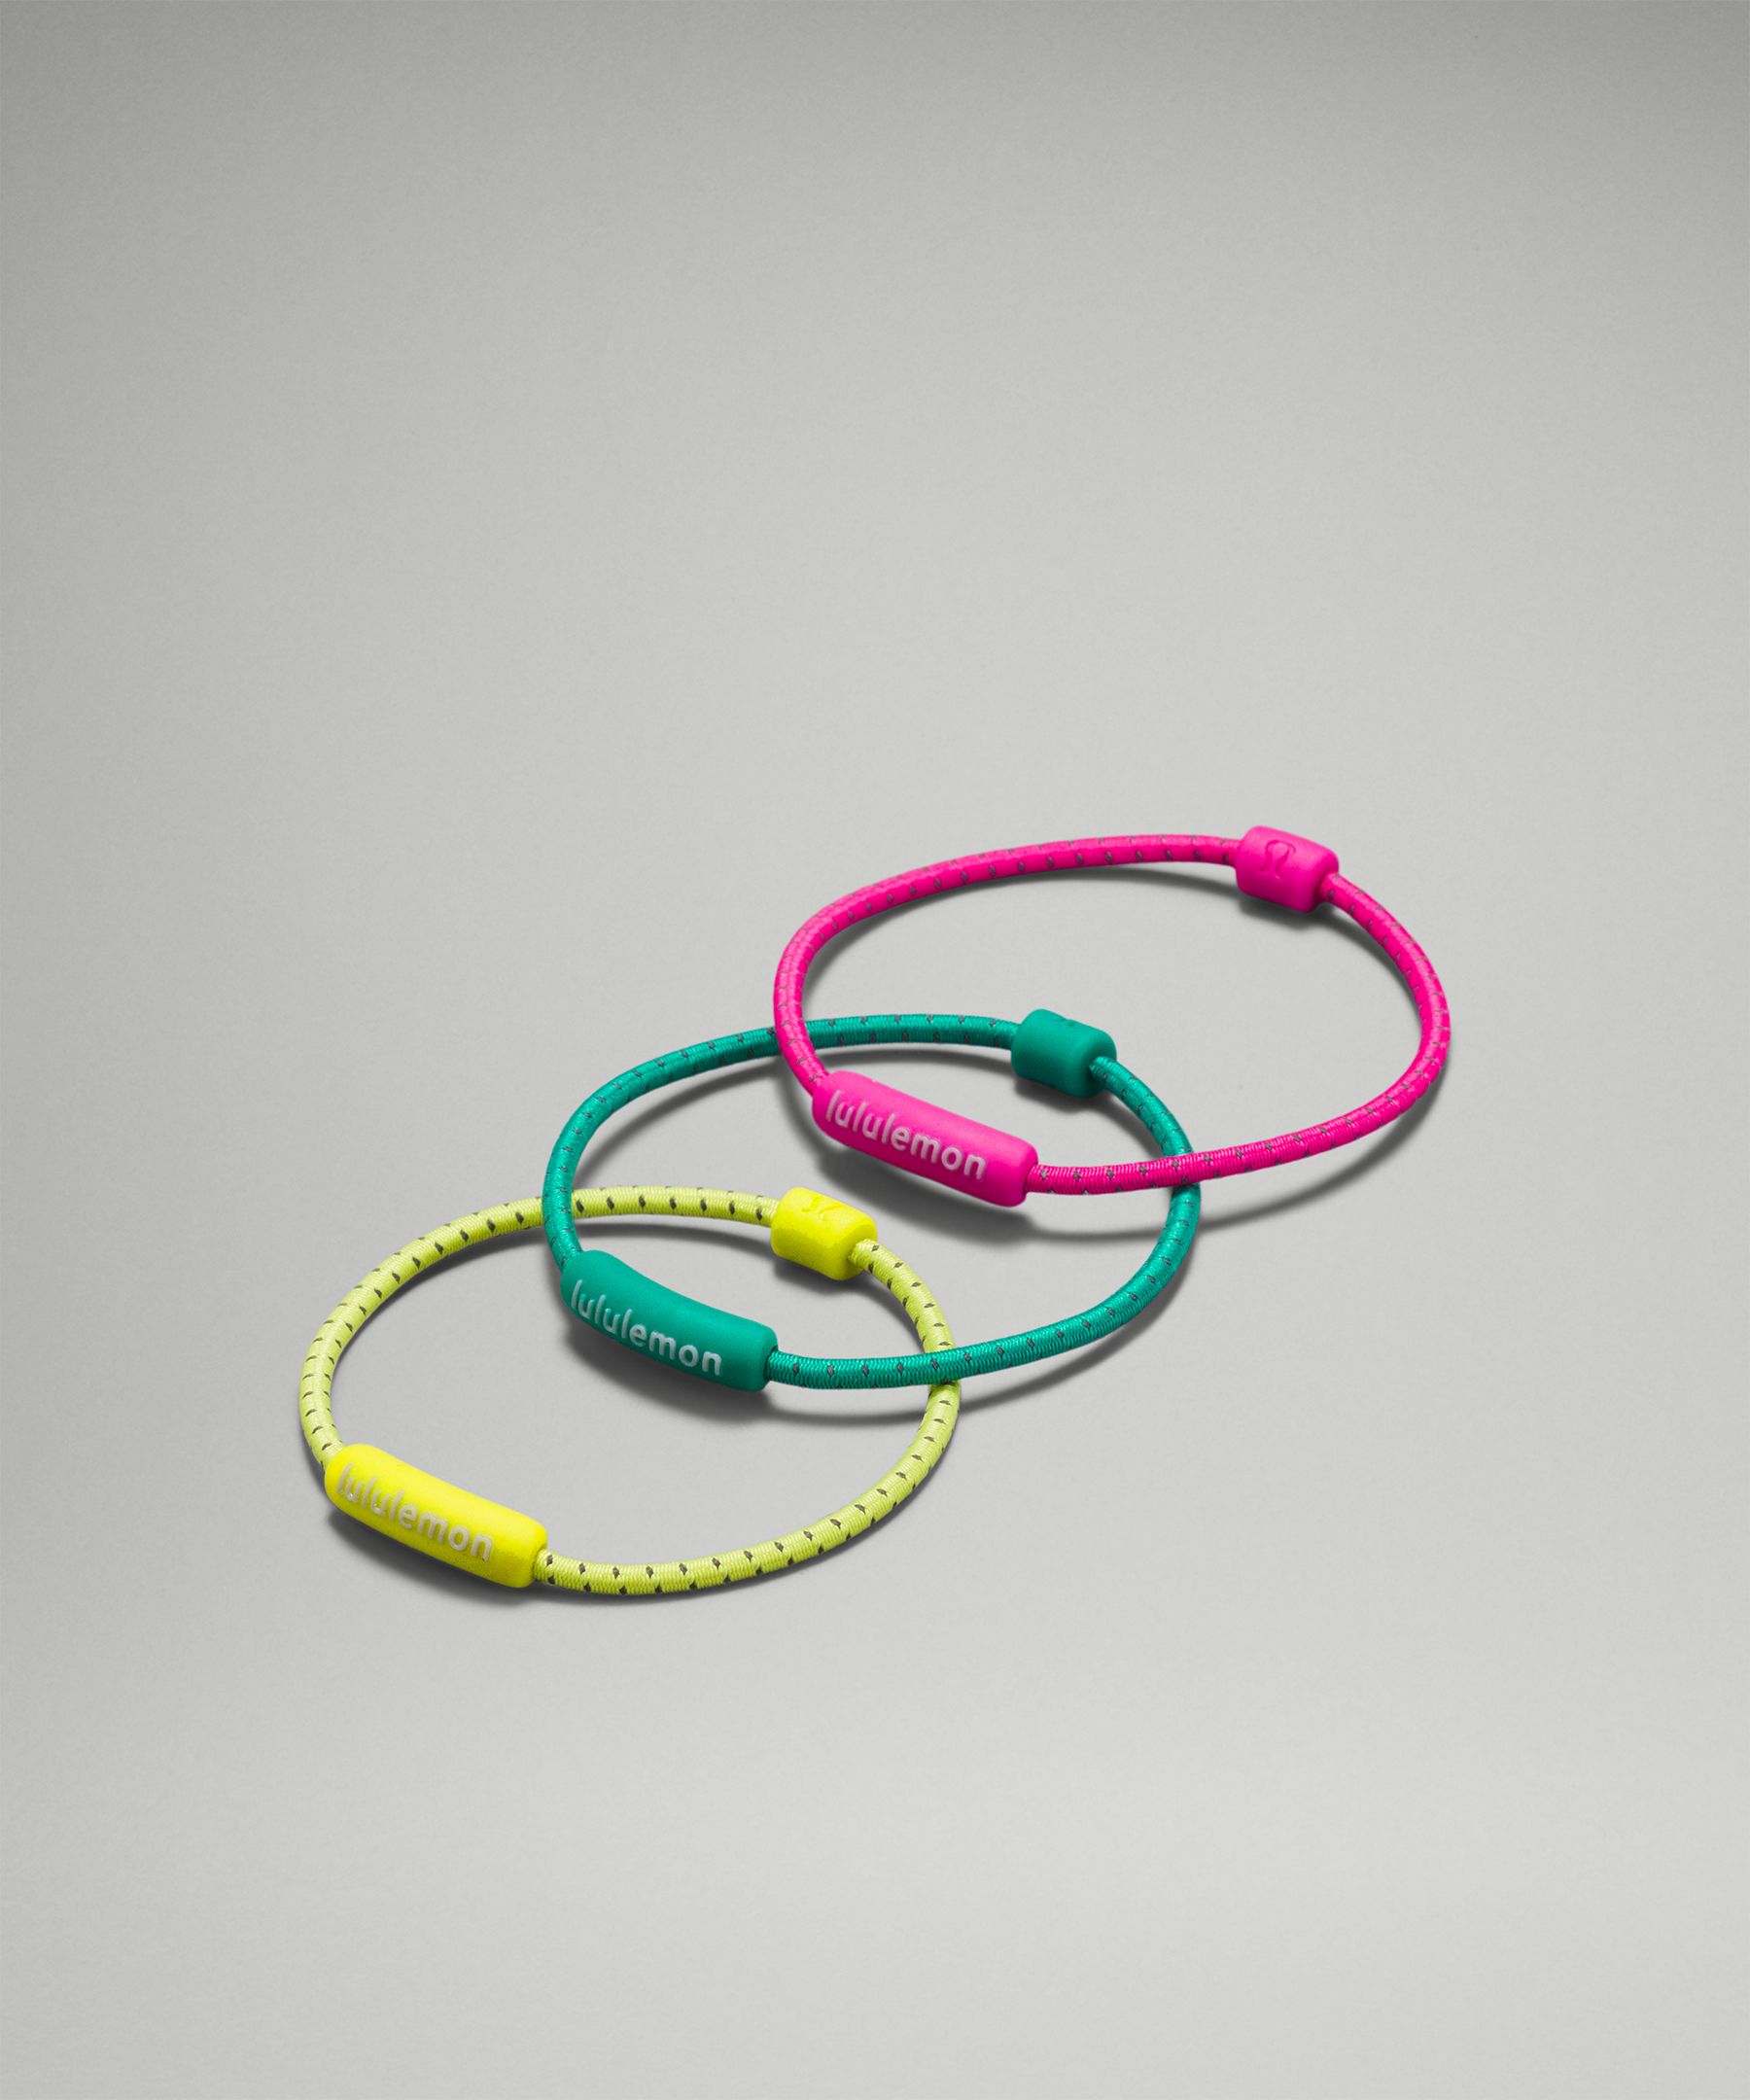 Lululemon Silicone Hair Ties 3 Pack In Yellow Serpentine/maldives Green/pow Pink